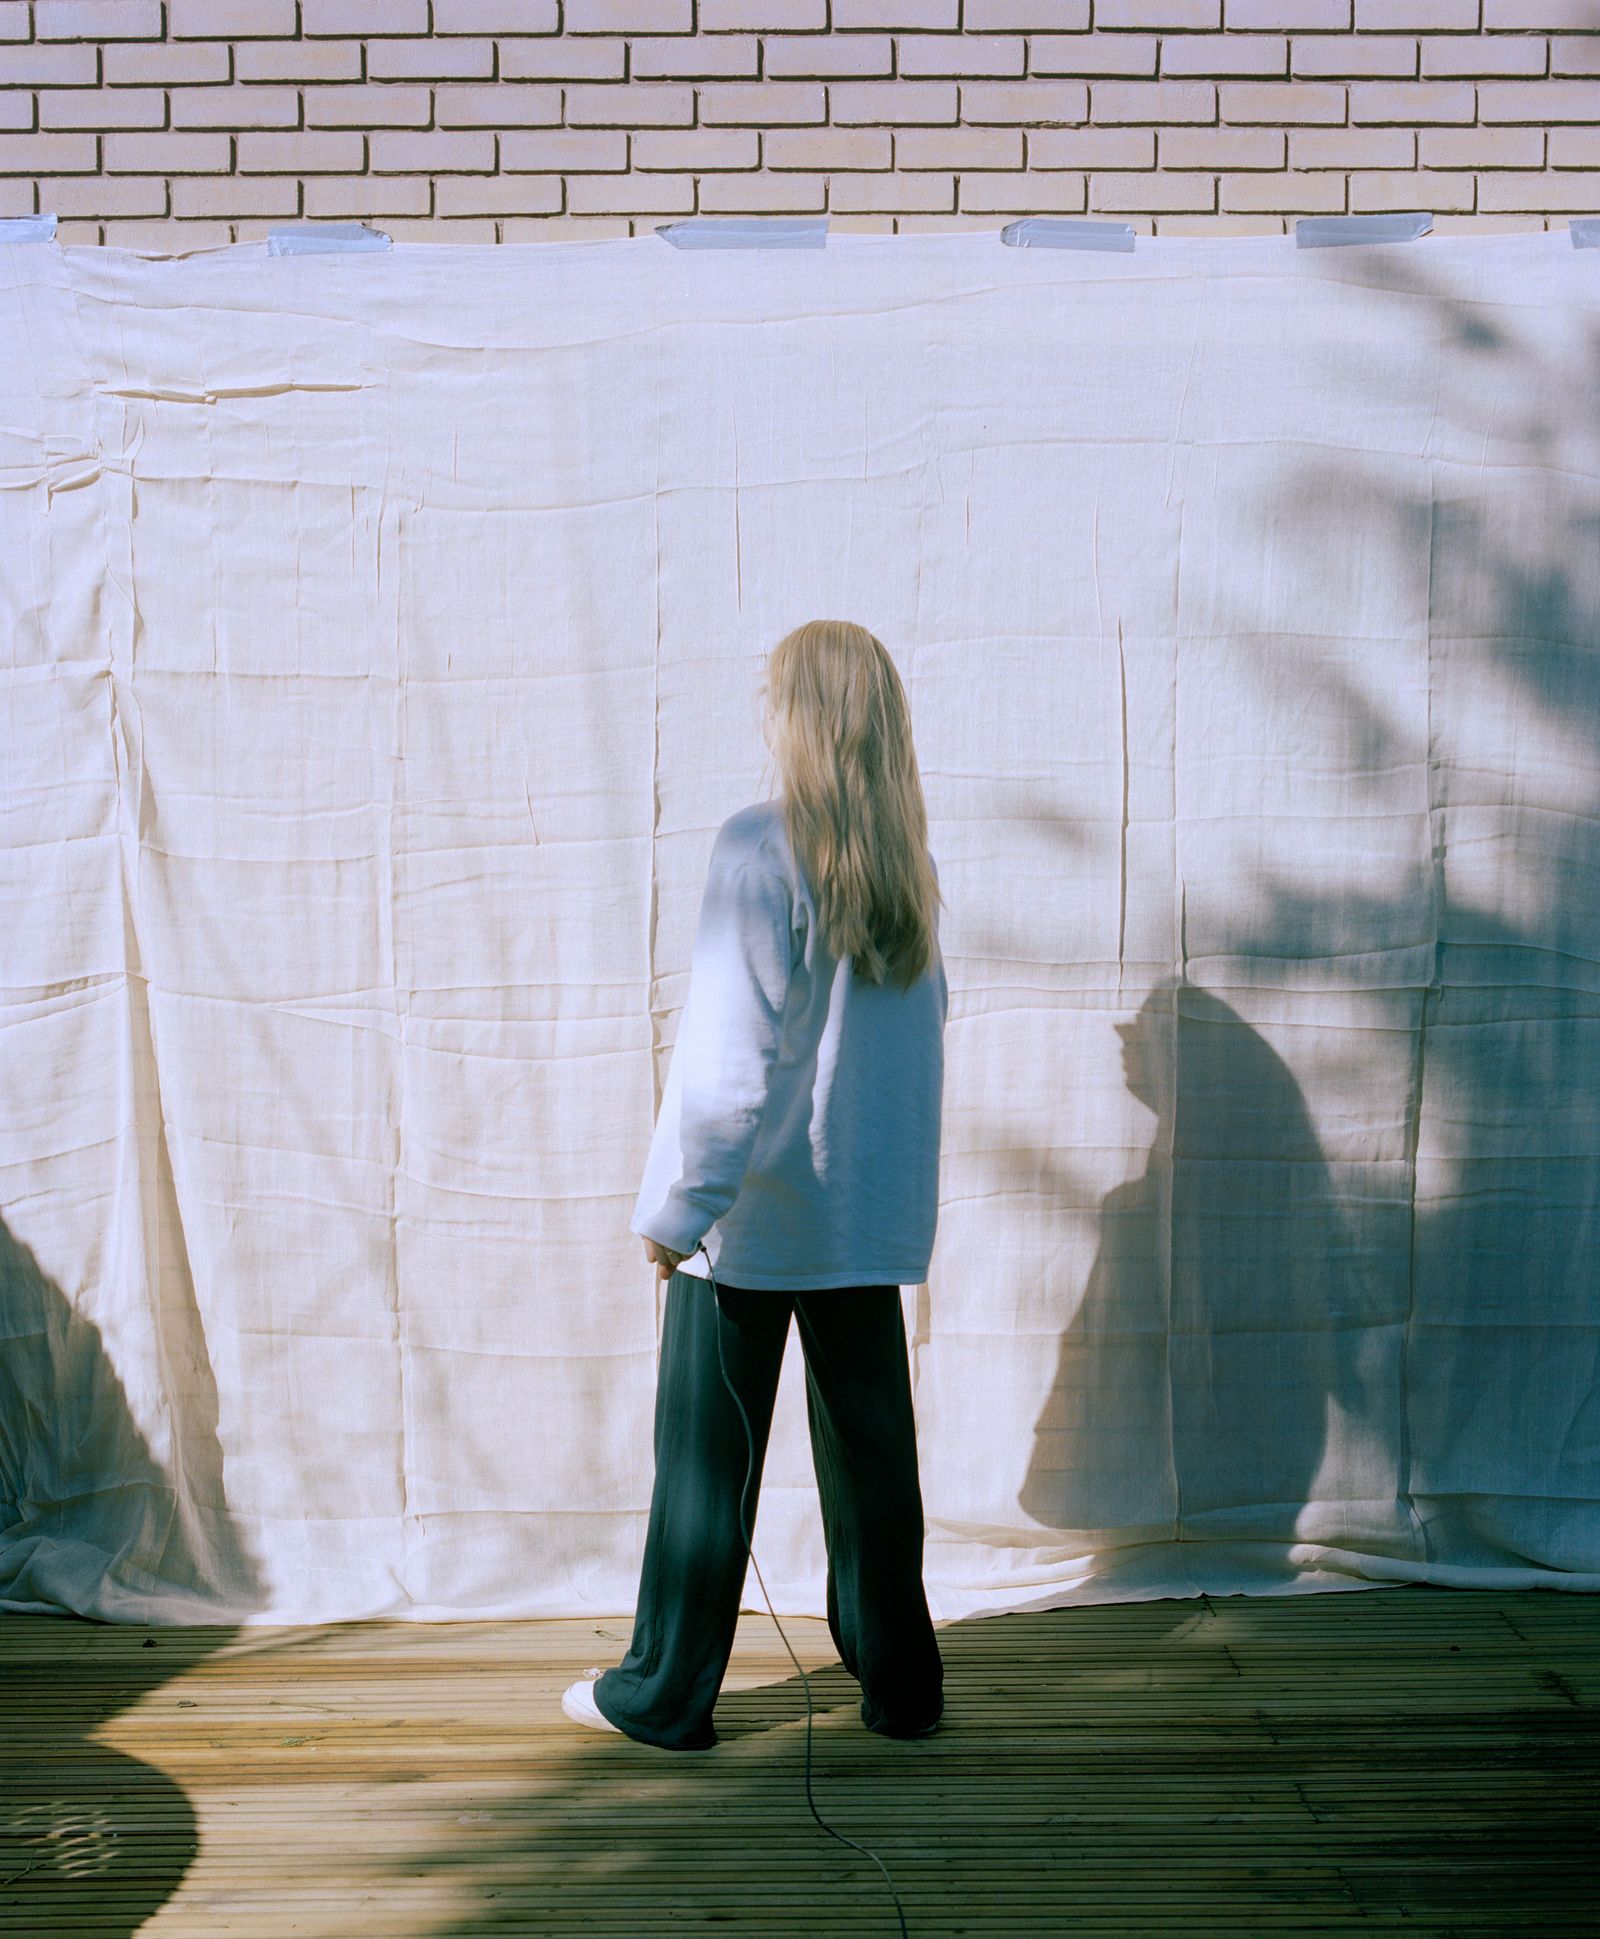 © Hayleigh Longman - Image from the Something lost, Something familiar photography project